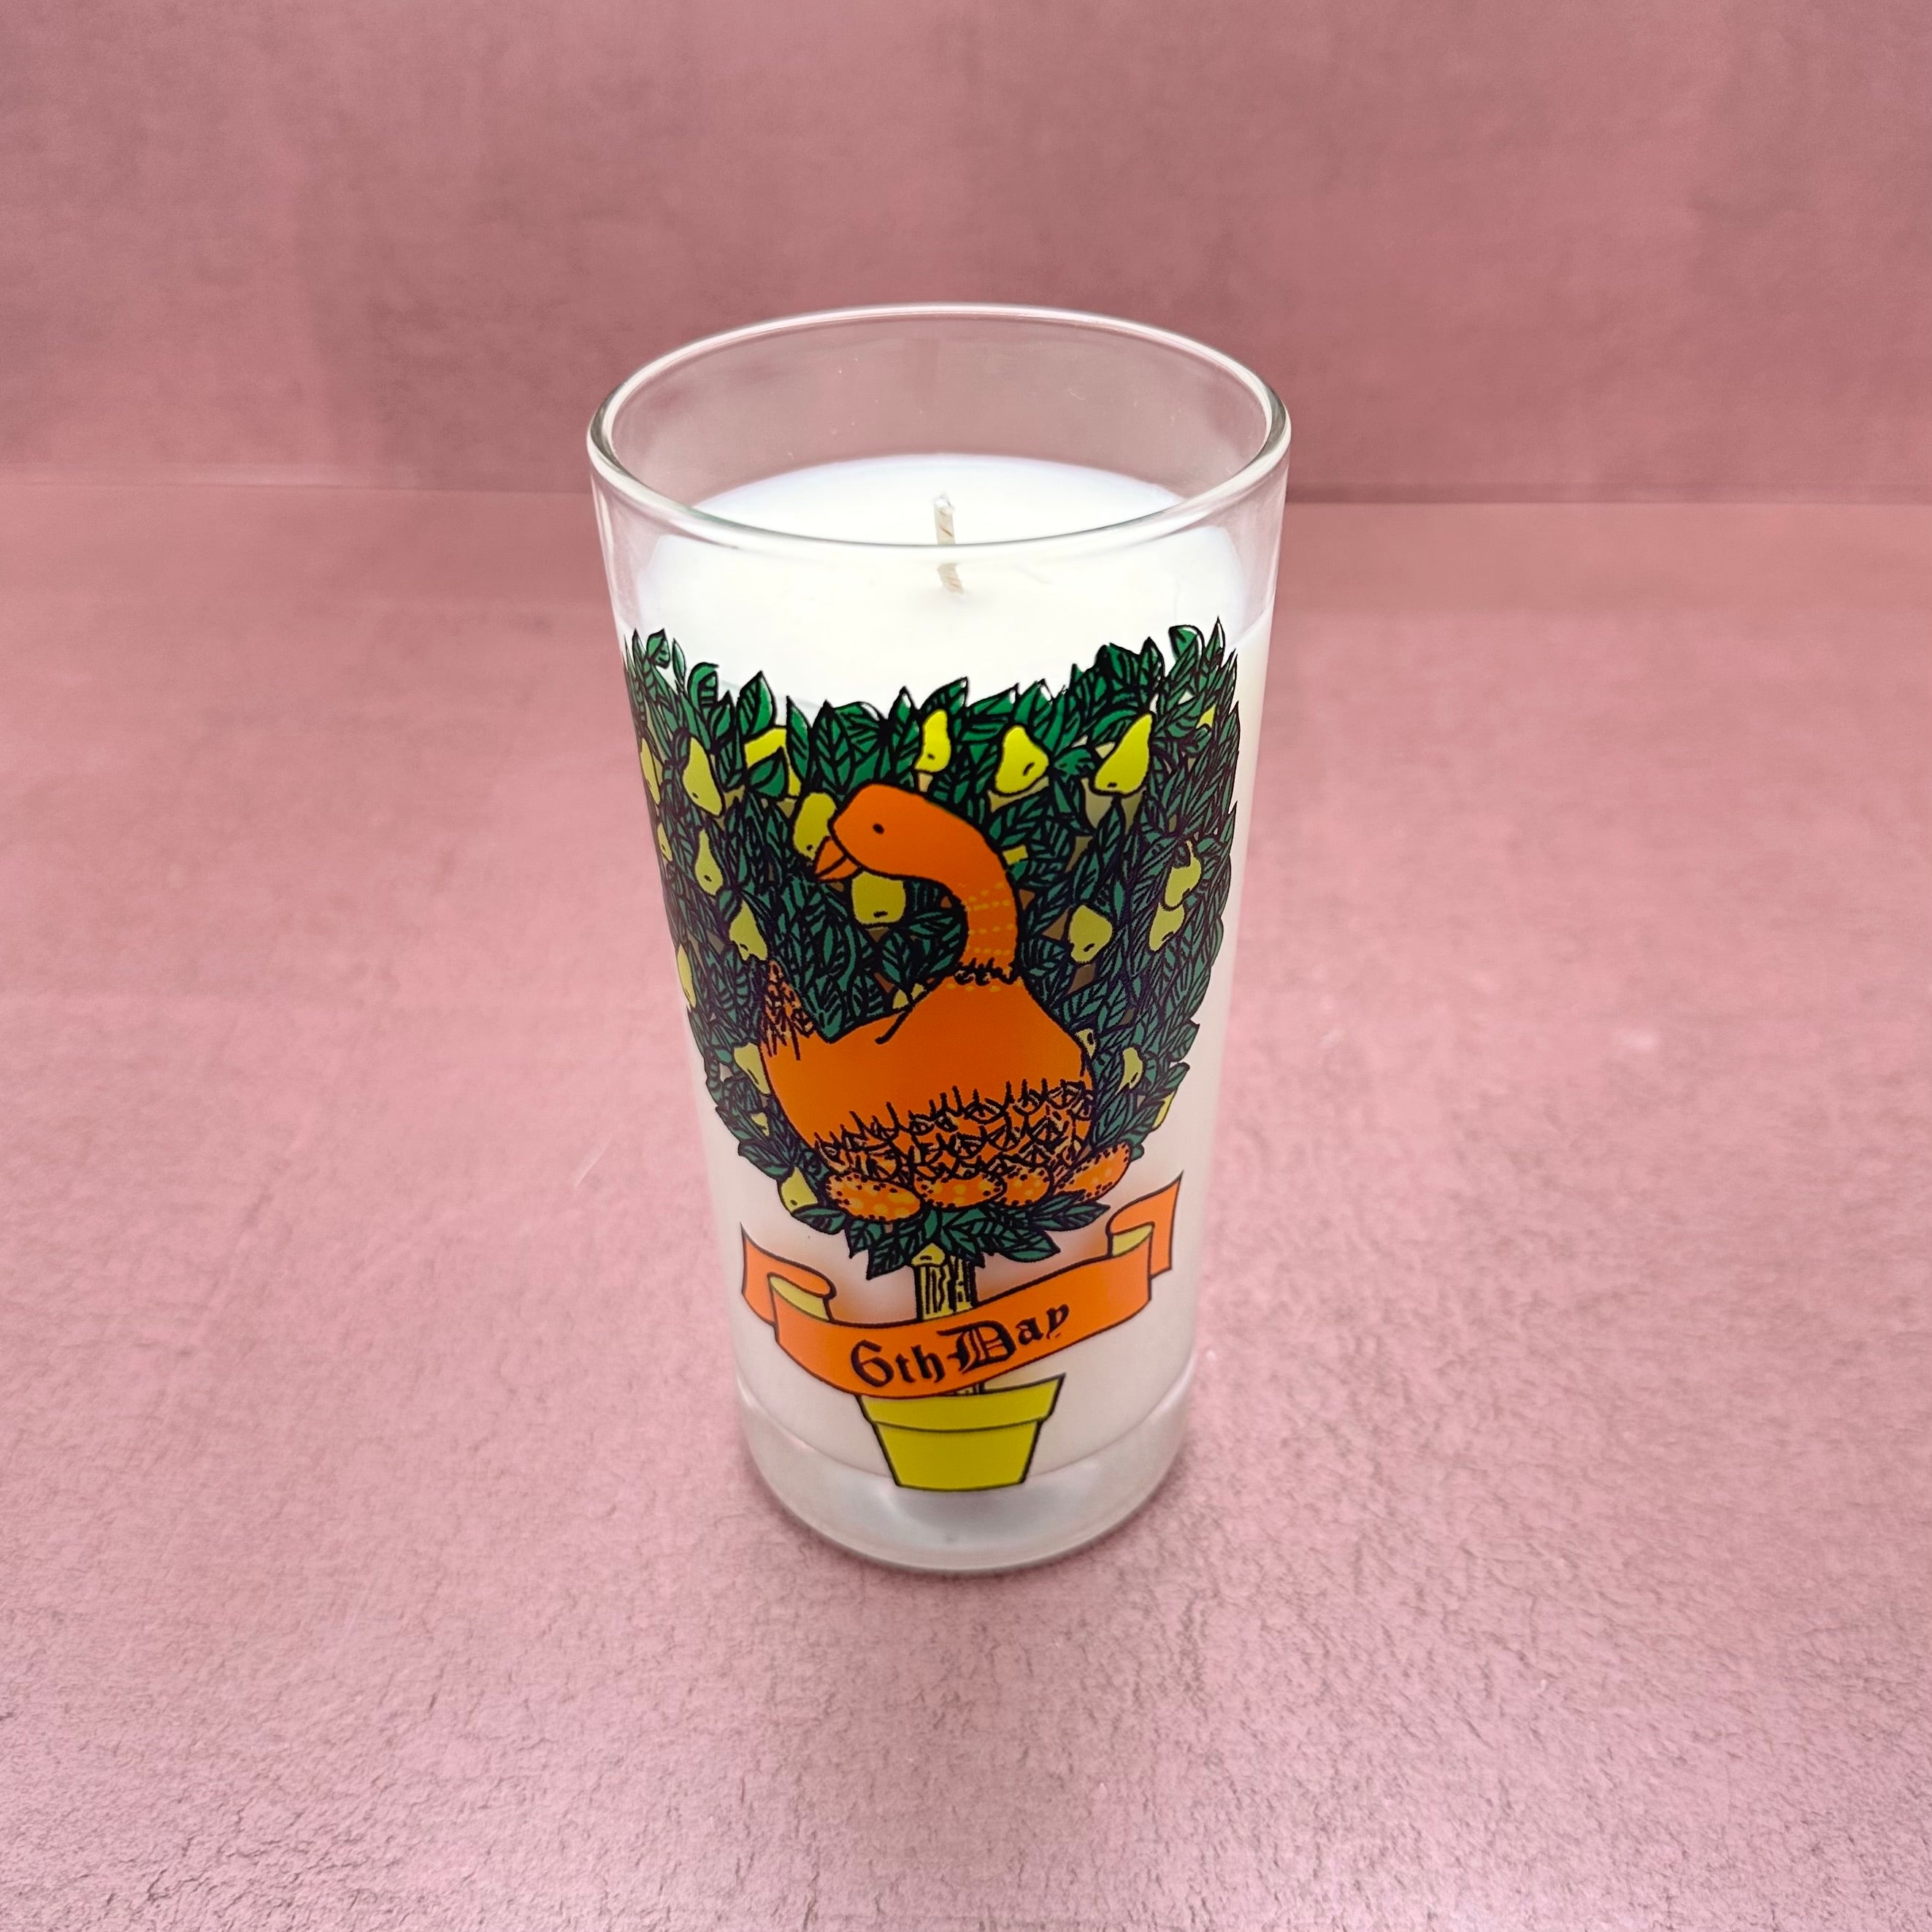 Vintage Days of Christmas Candles